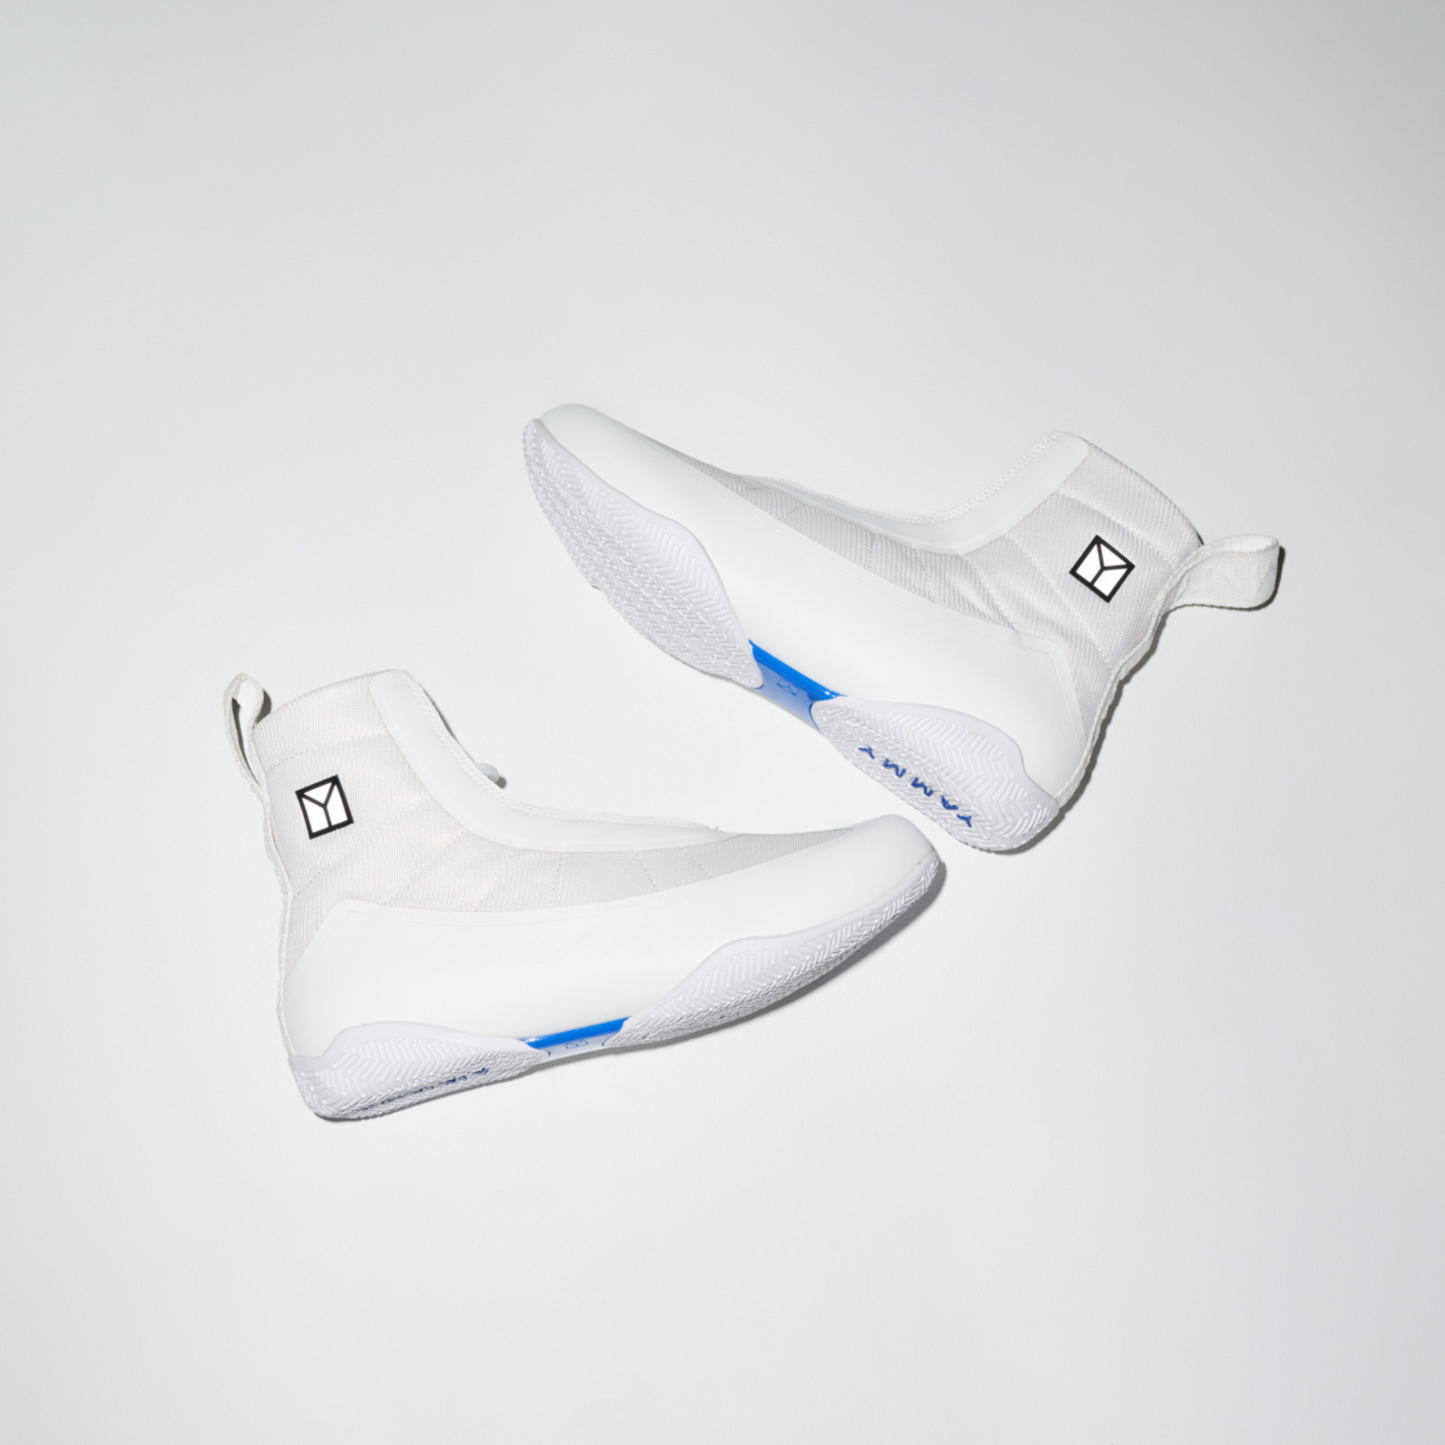 YAMMY Flux Mid Whiteout boxing boots